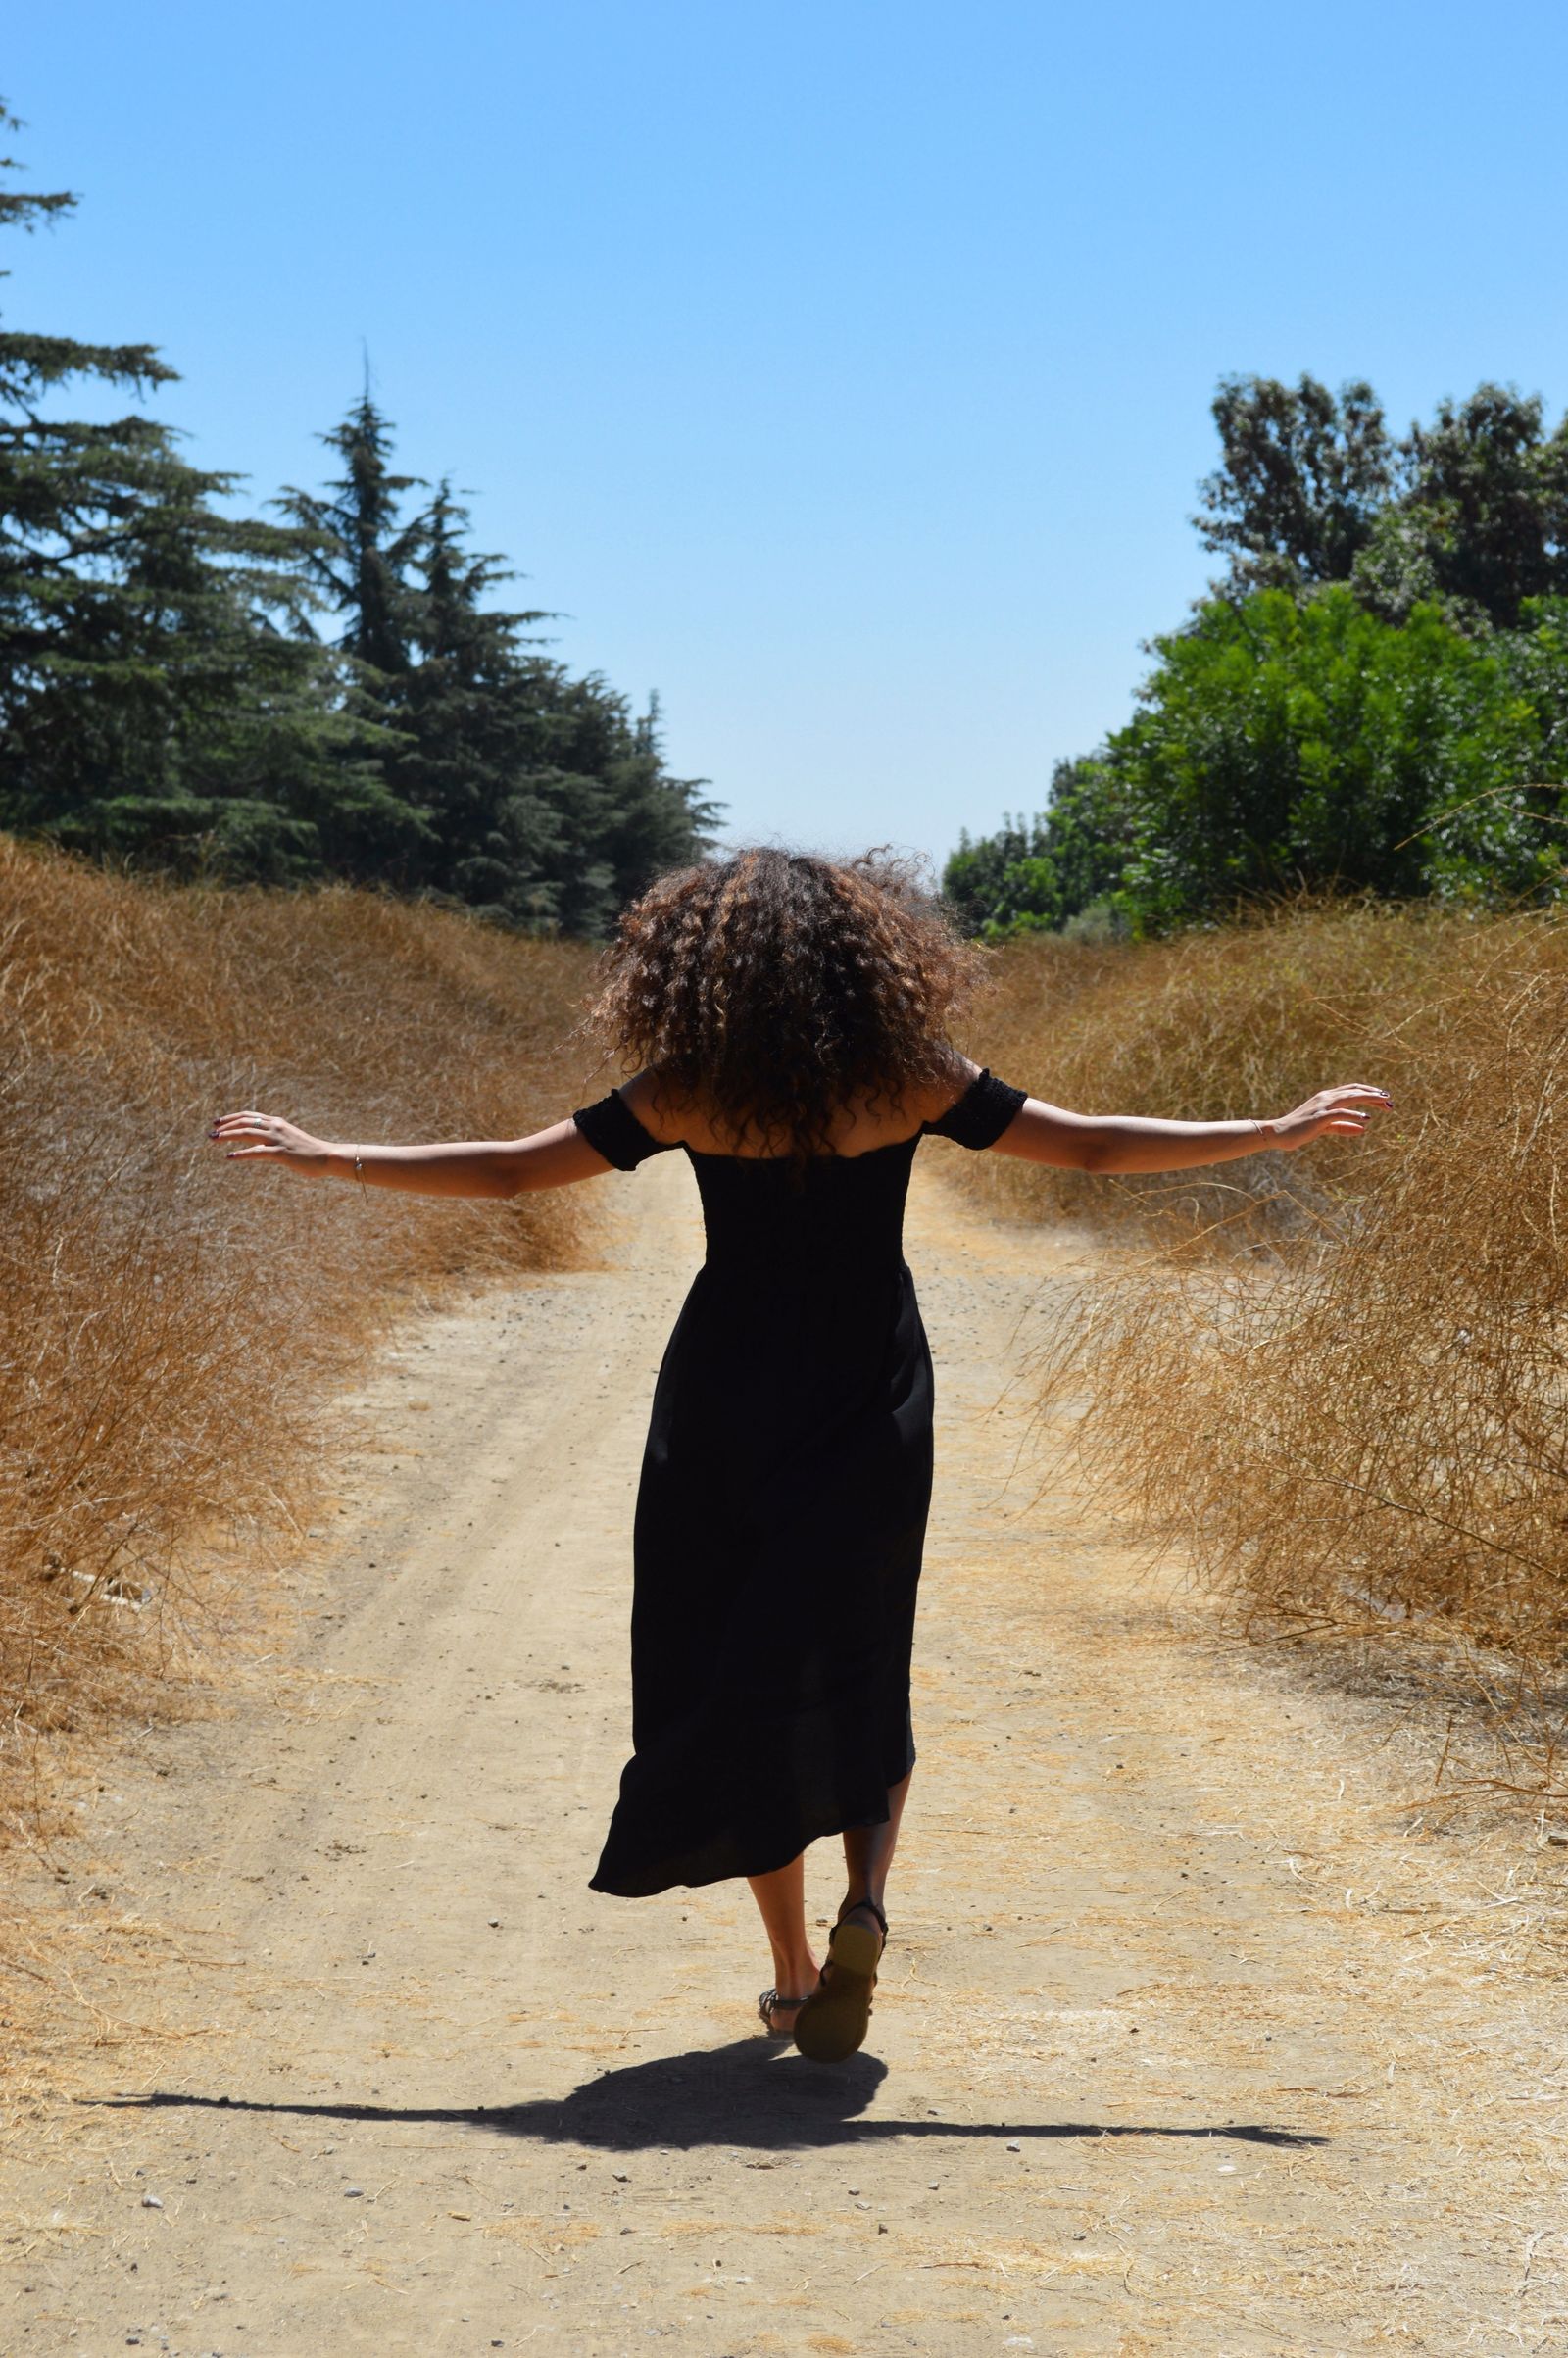 © Danelle Cole - Finding that moment to just be free. Model Inessa, Lake Balboa Park, California